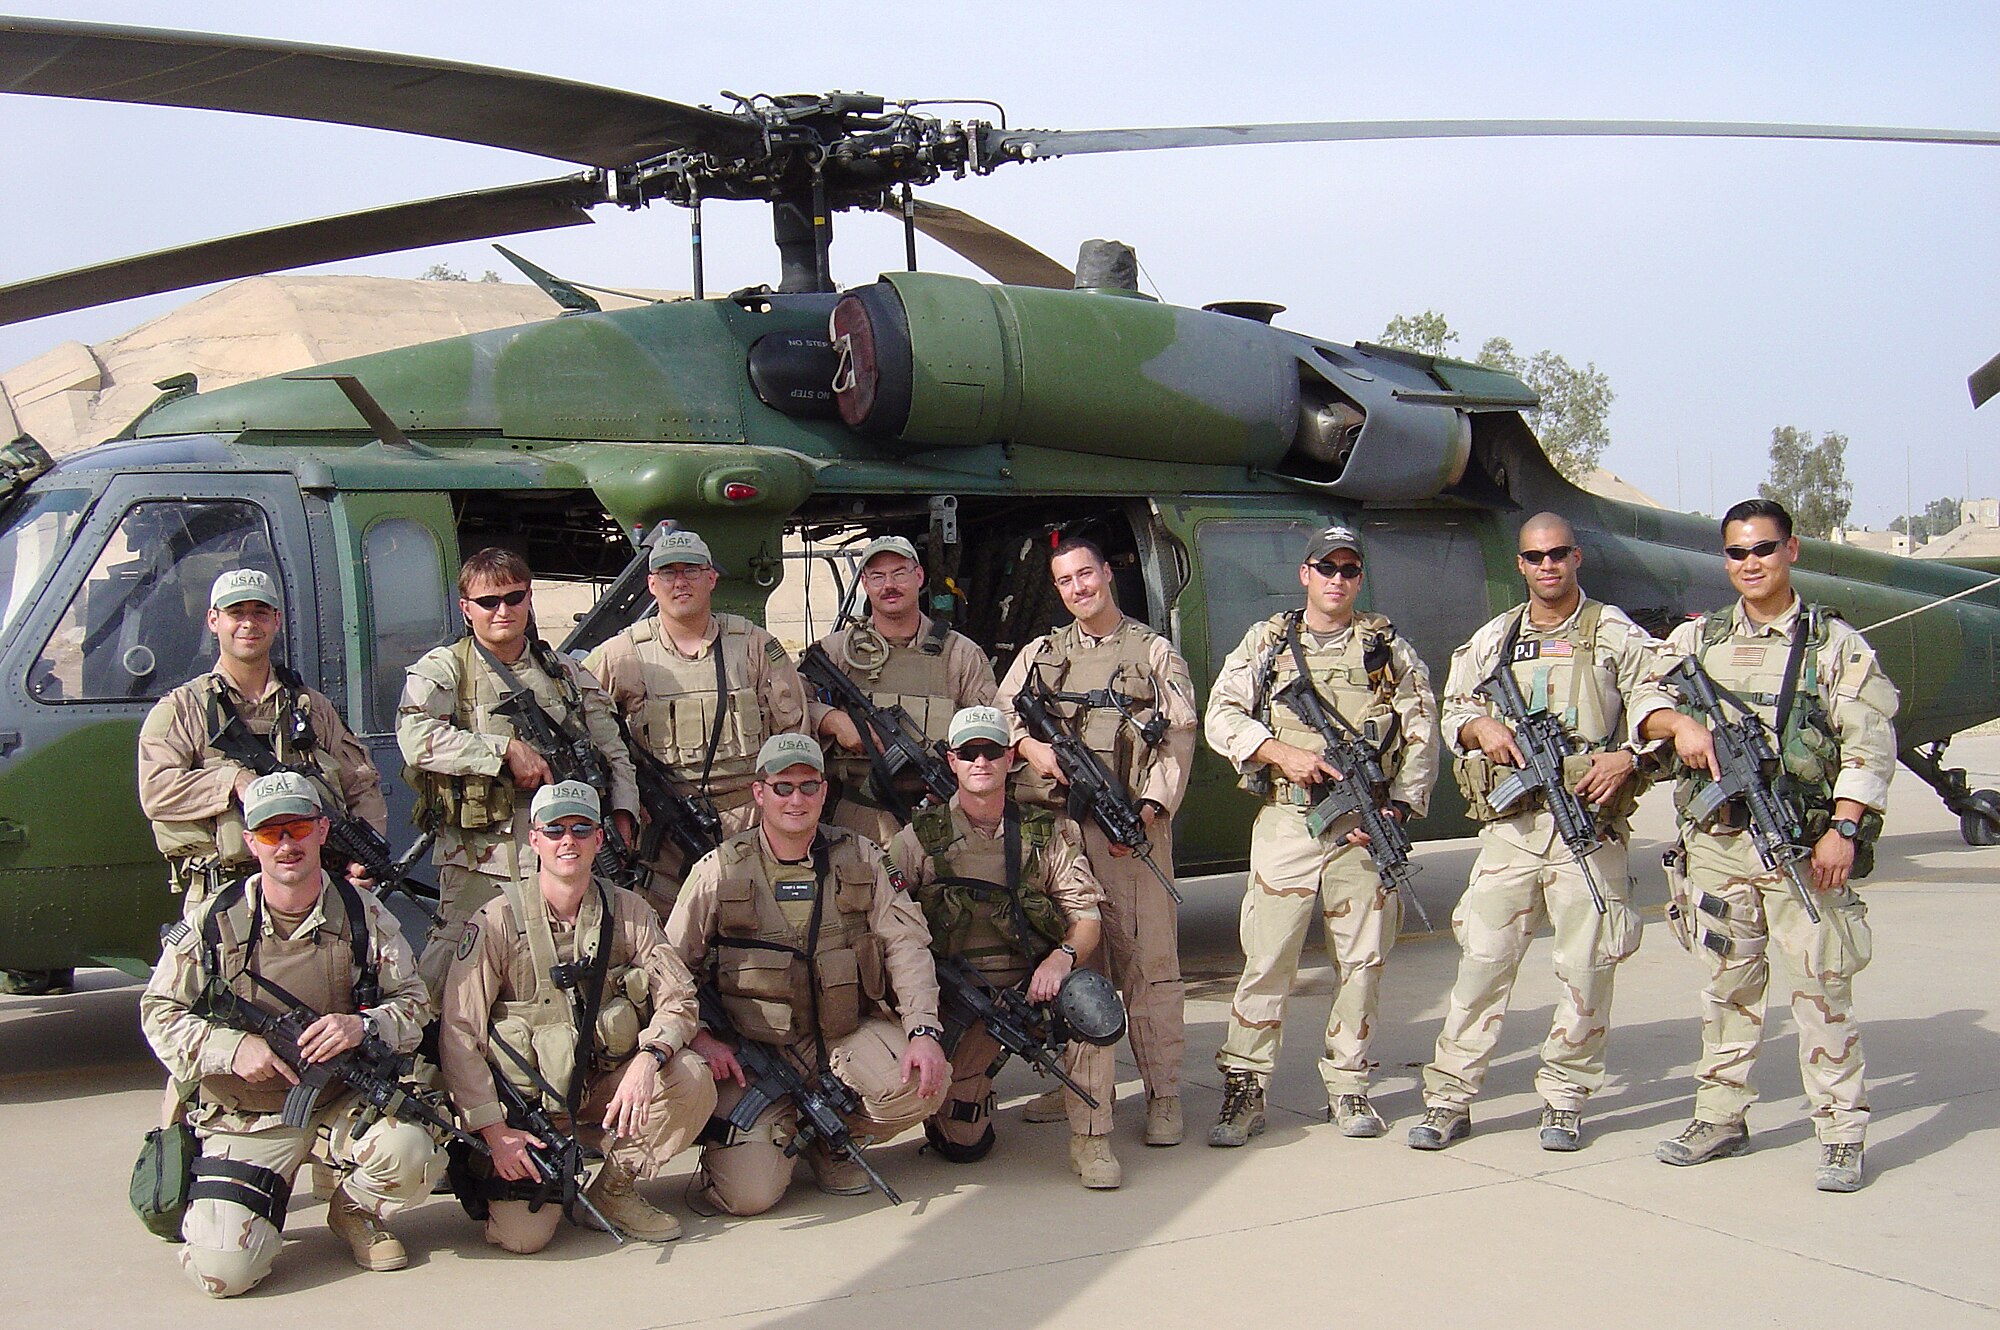 BALAD AIR BASE, Iraq (AFPN) -- The crew members of Jolly 11 and Jolly 12: (Top row, from left) then-Capt. Joseph Galletti, Staff Sgt. Vincent J. Eckert, then-Tech. Sgt. Paul Silver, Tech. Sgt. Thomas Ringheimer, then-1st Lt. Gregory Rockwood, Staff Sgt. Michael Rubio, Staff Sgt. John Griffin and Staff Sgt. Edward Ha. (Bottom row: from left) Staff Sgt. Patrick Ledbetter, Capt. Bryan Creel, Capt. Robby Wrinkle and Tech. Sgt. Michael Preston. Not shown is Staff Sgt. Matthew Leigh. (U.S. Air Force photo by Staff Sgt. Prentice Colter)